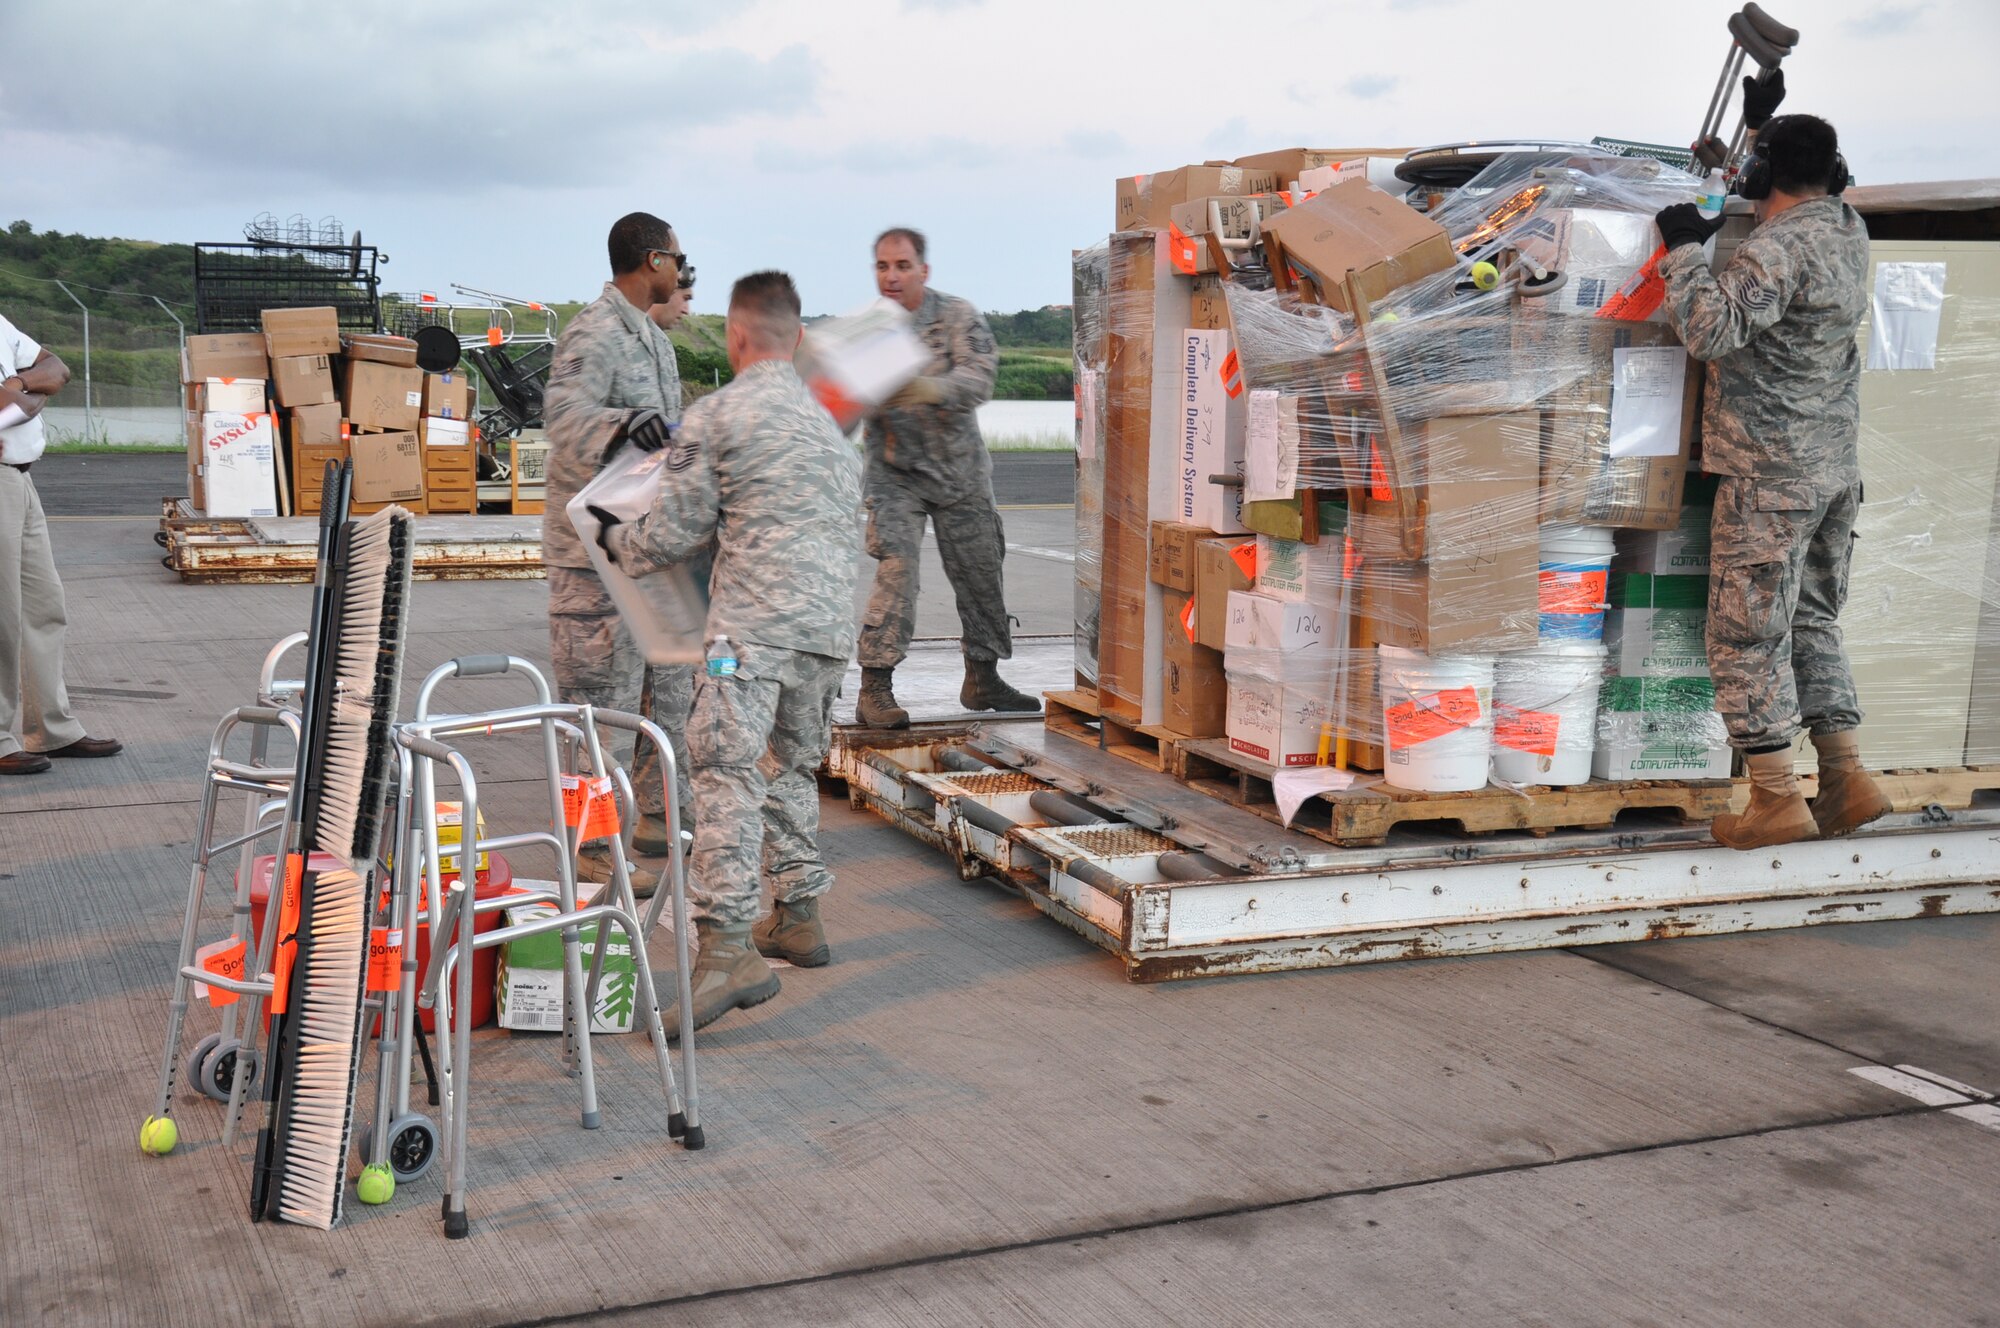 Aerial porters from the 81st Aerial Port Squadron, Joint Base Charleston, S.C., sort donated items delivered to the people of Grenada and prepare them for delivery during a humanitarian aid mission to Haiti and Grenada Dec. 30, 2010. (U.S. Air Force photo/Senior Airman Robert Pilch)